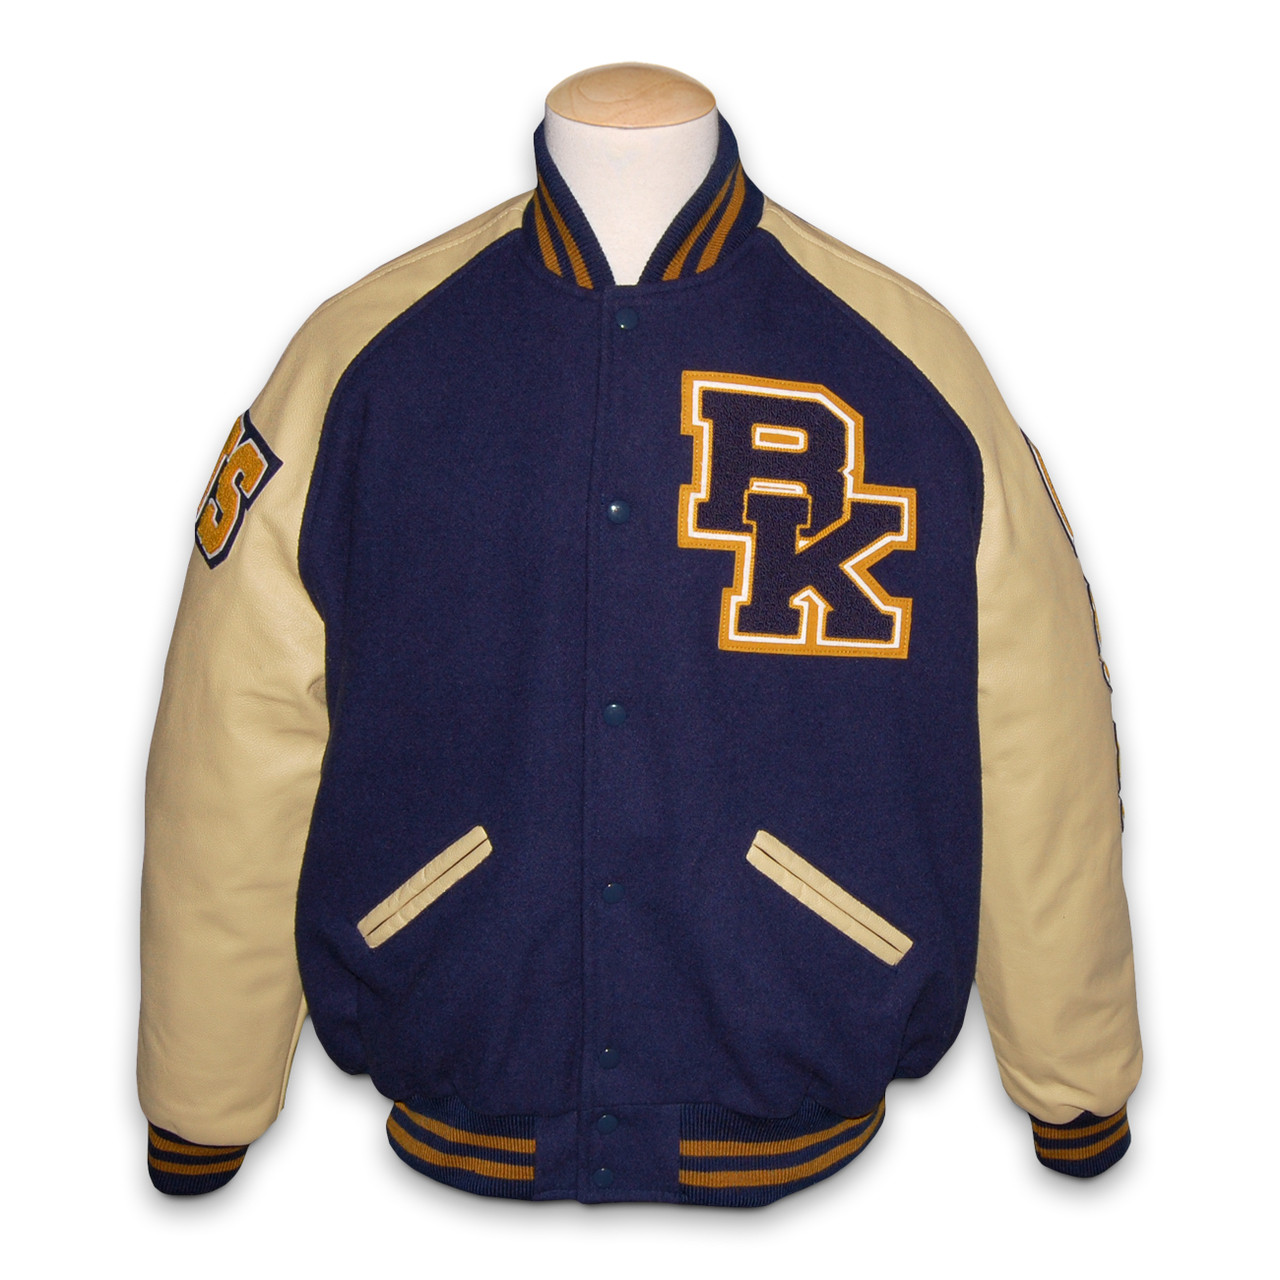 High School Letterman Jackets | Customize Your Own Sports Jacket